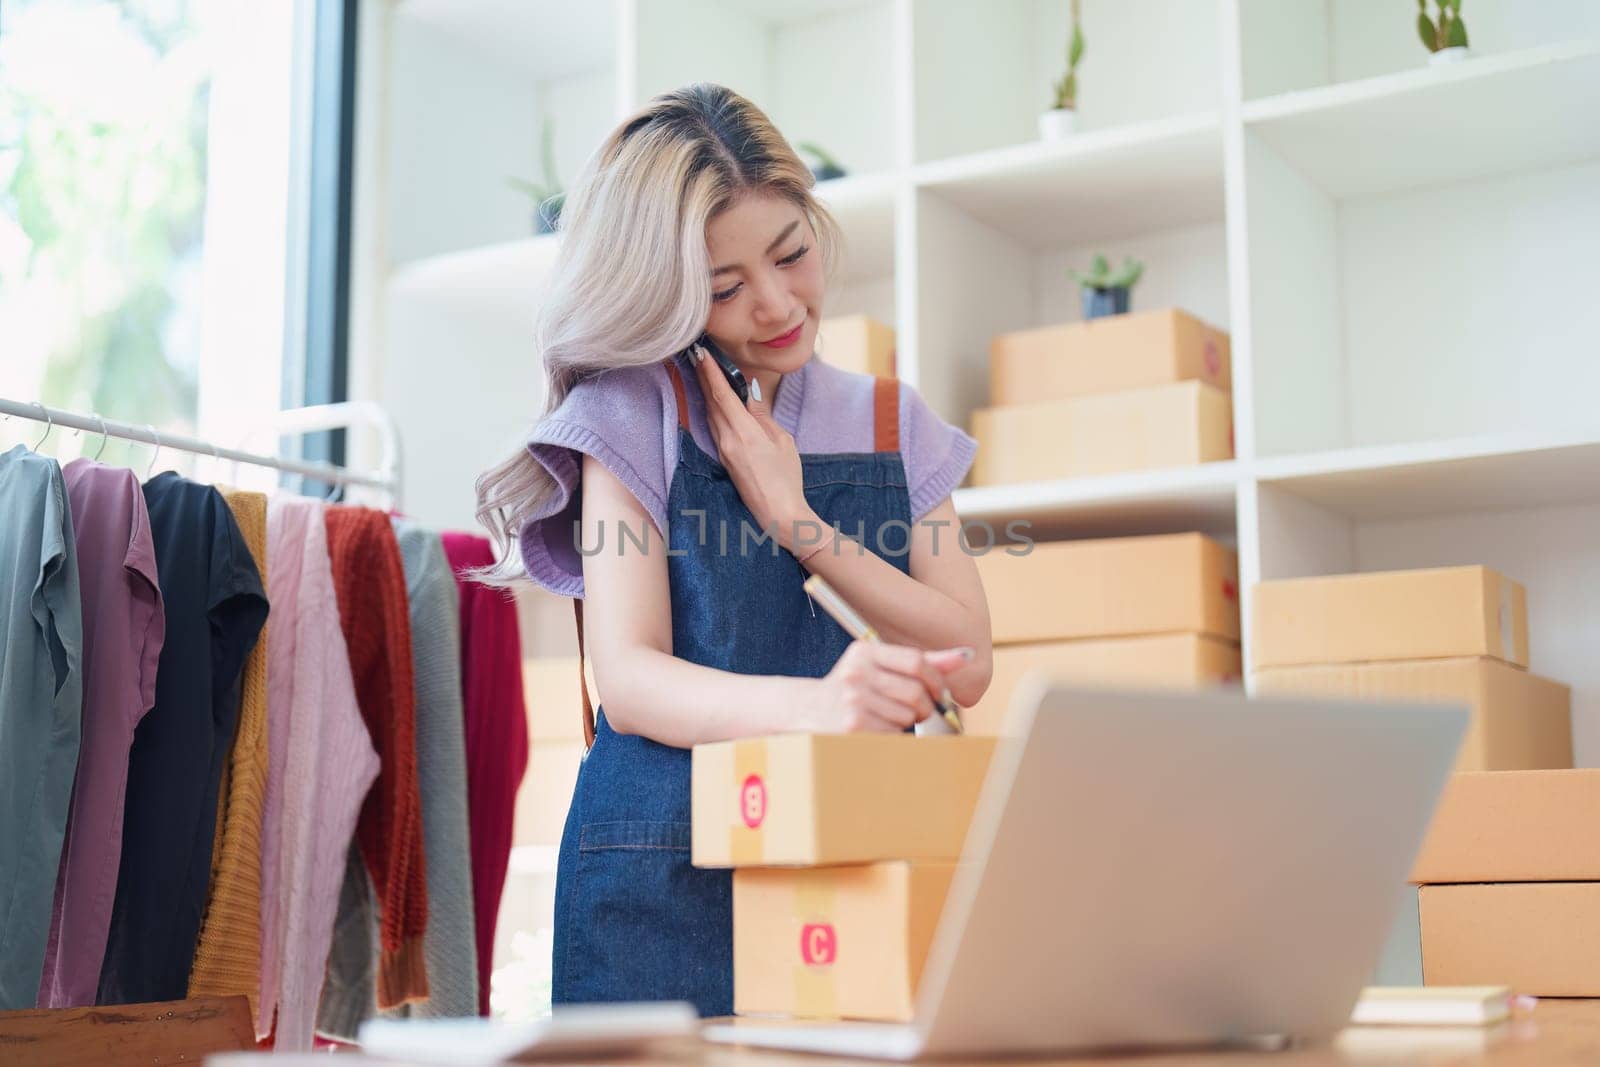 Starting small business entrepreneur of independent Asian female online seller talking on the phone with a customer and packing products for delivery to the customer. and SME delivery concept.